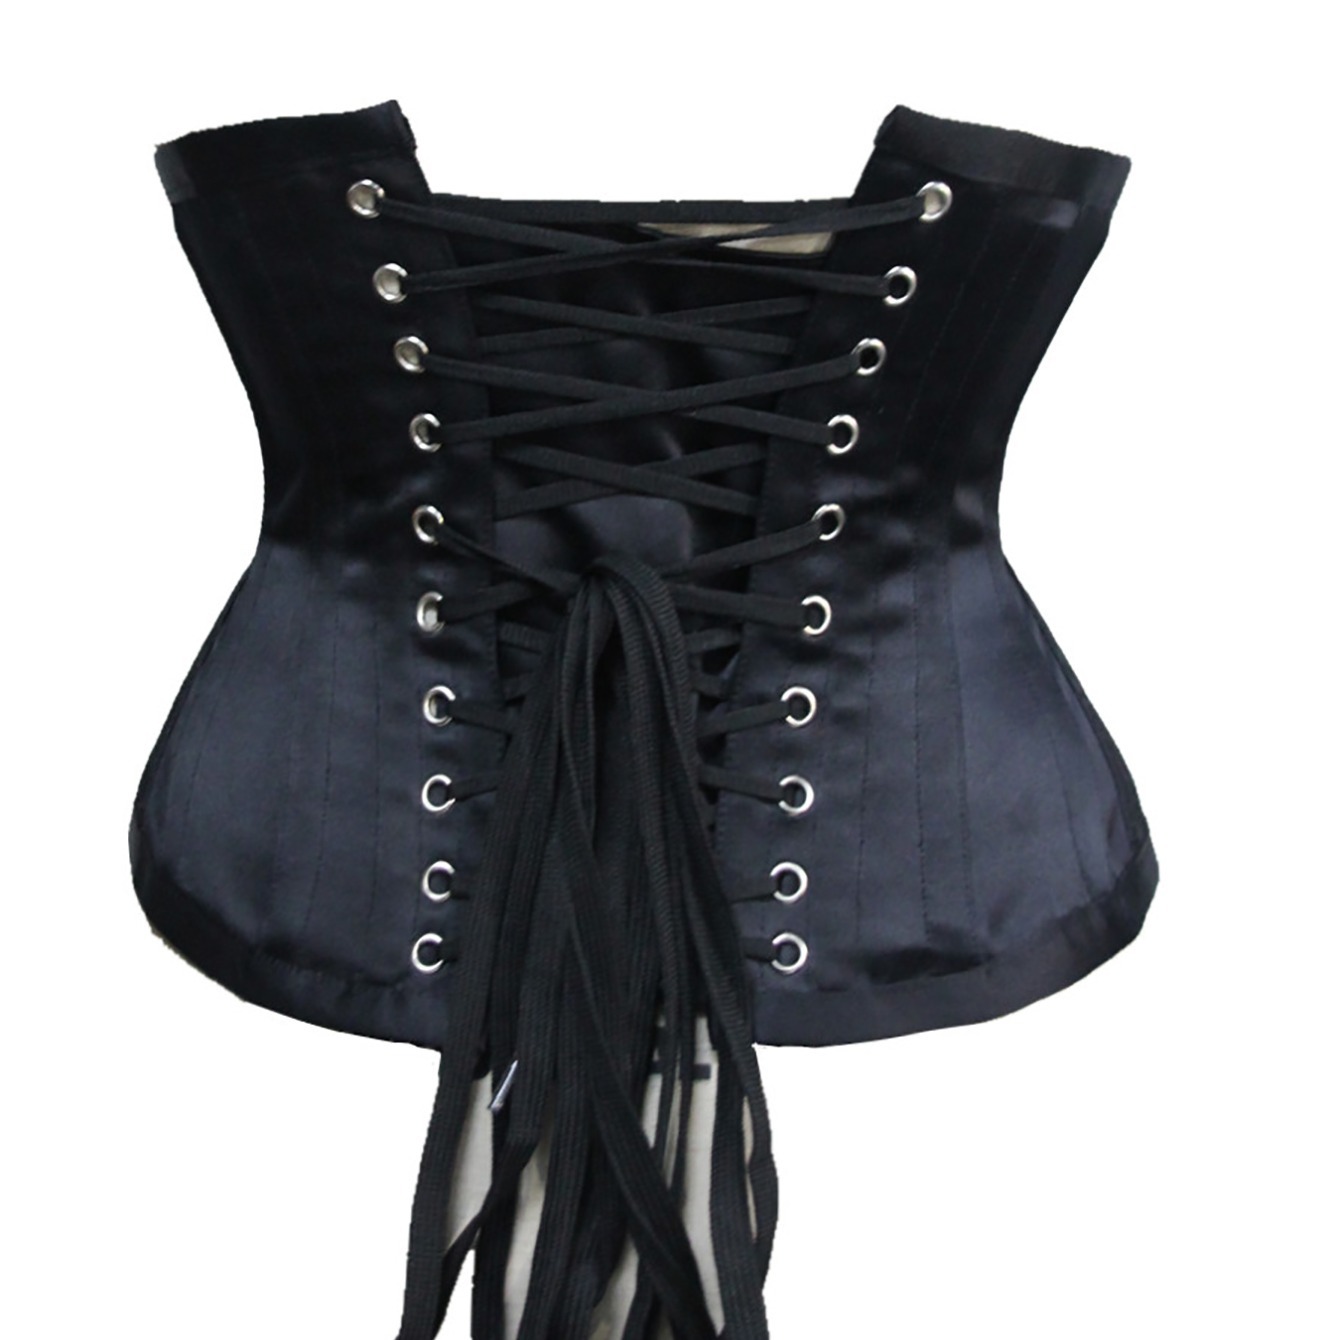 FOCUSSEXY Womens Bustier Corset Top Waist Trainer Sexy Lingerie Sets Waist  Cincher Steampunk Gothic Corsets with G-string